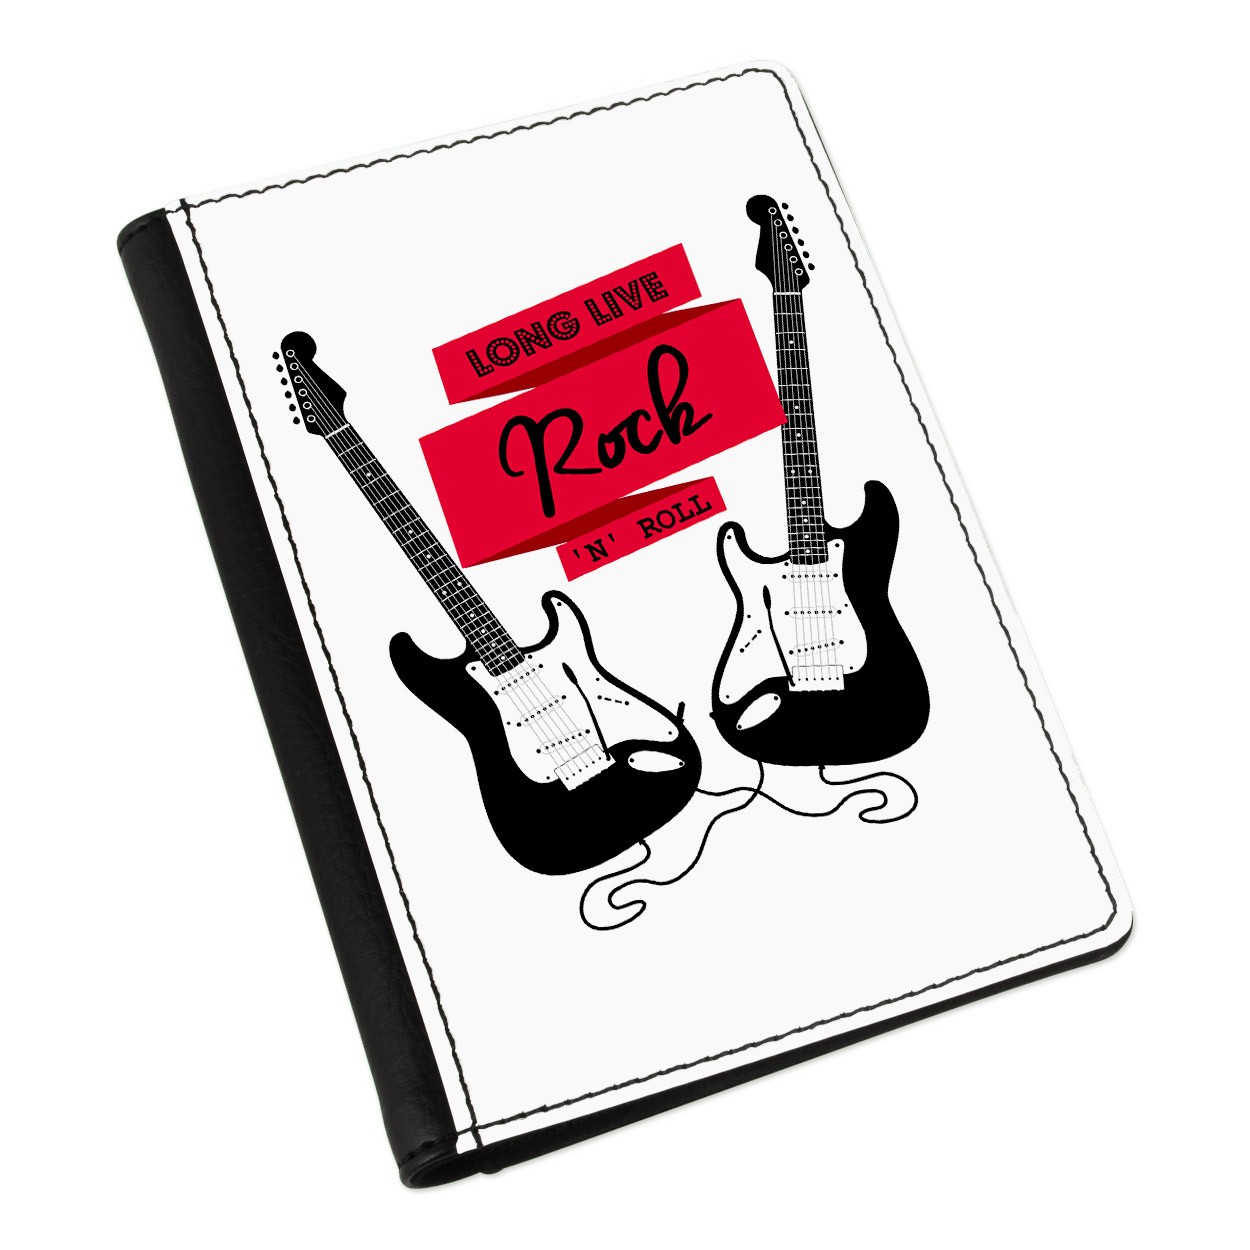 Long Live Rock N Roll Electric Guitar Passport Holder Cover